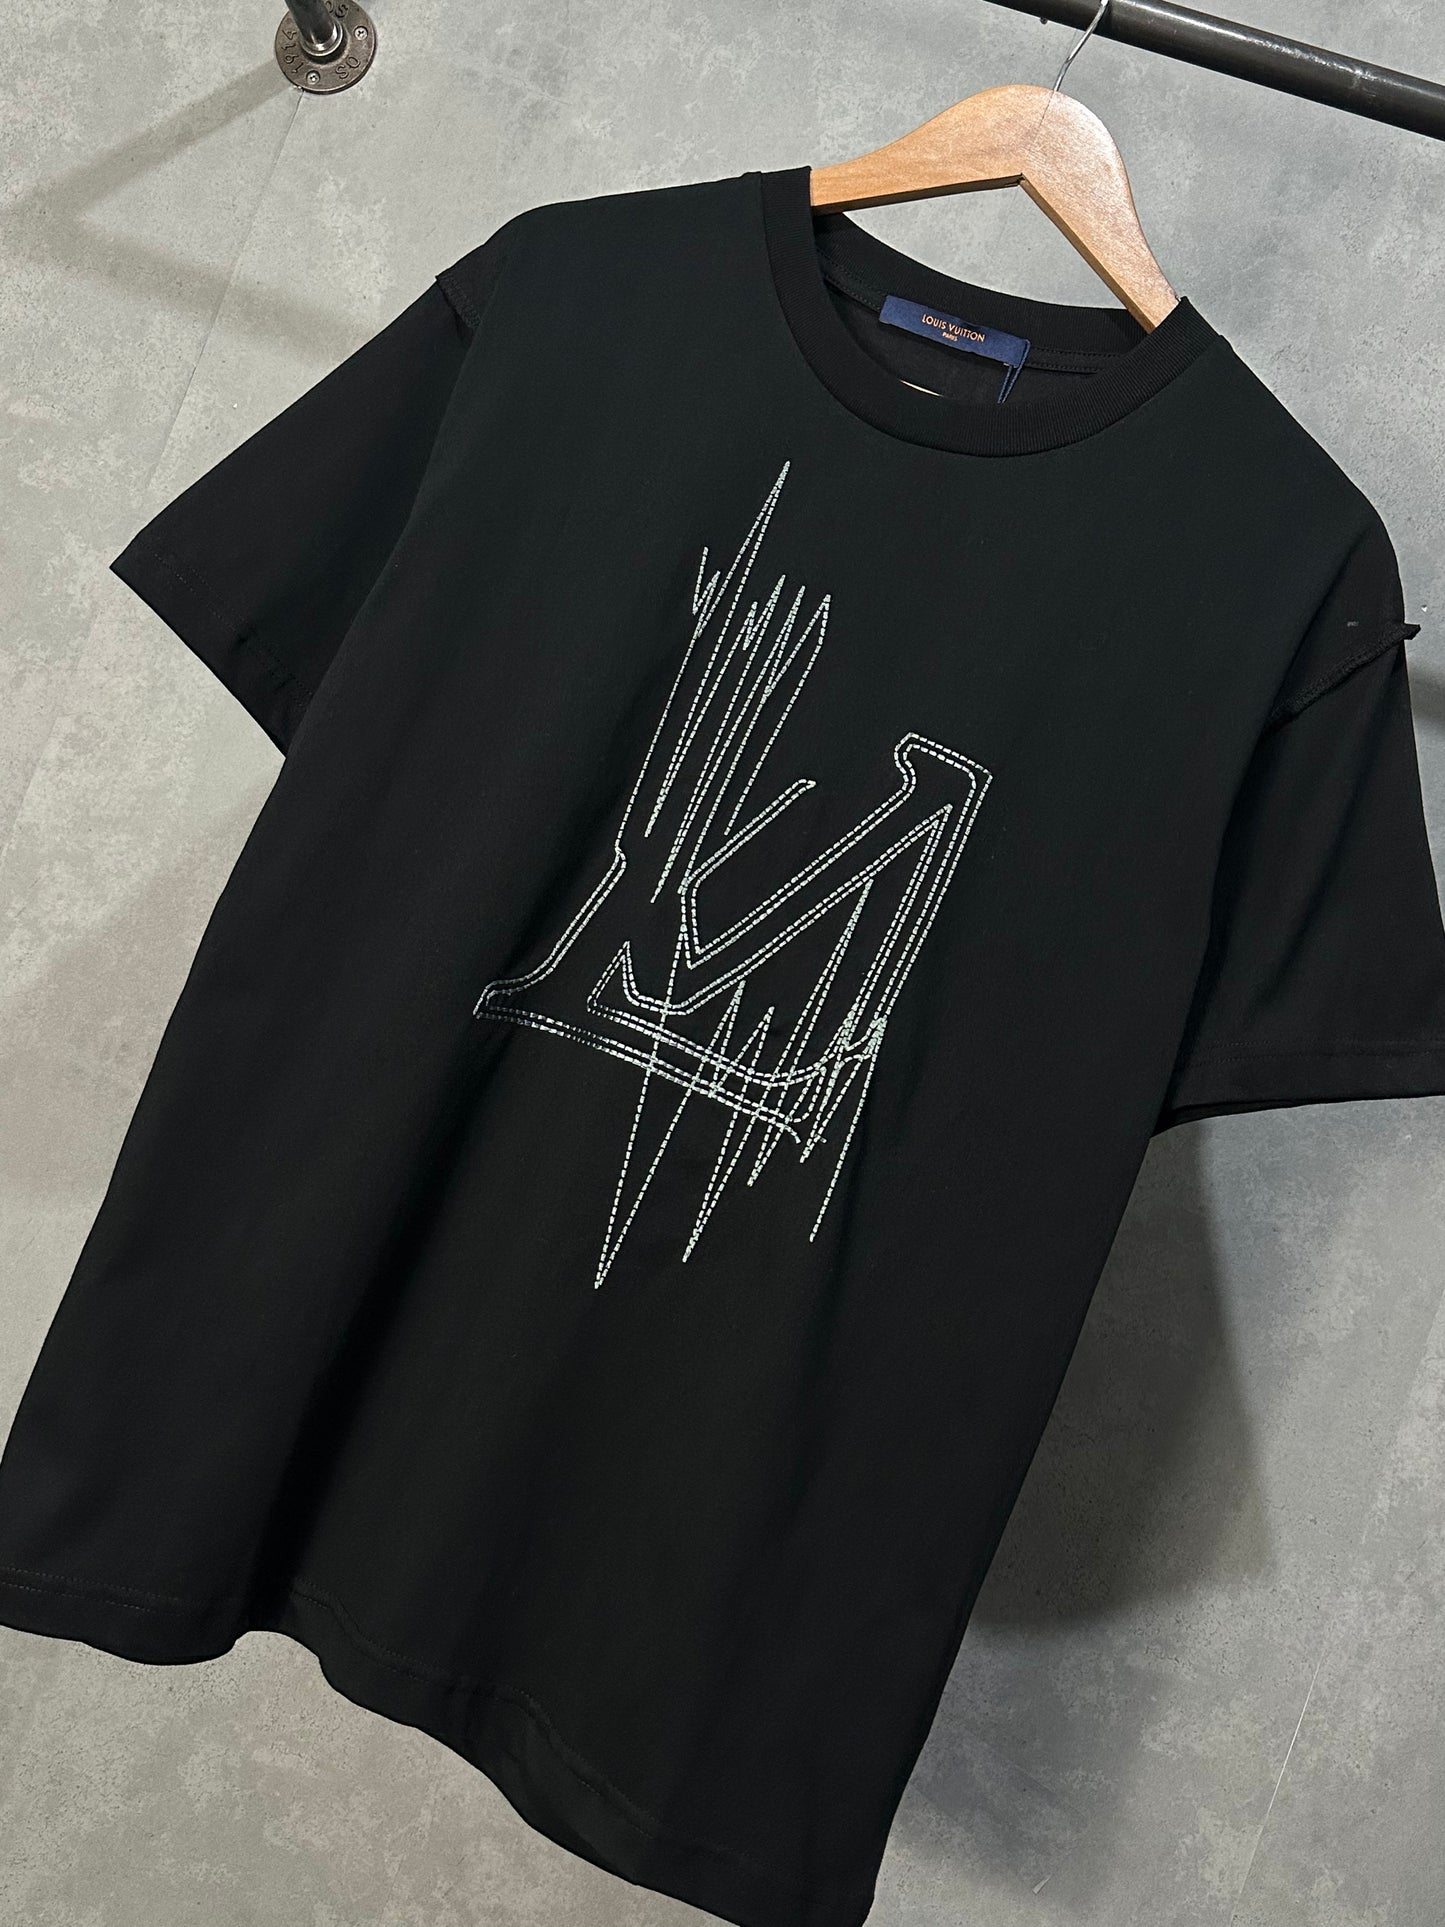 Louis Vuitton Frequency Graphic T-Shirt Size Small